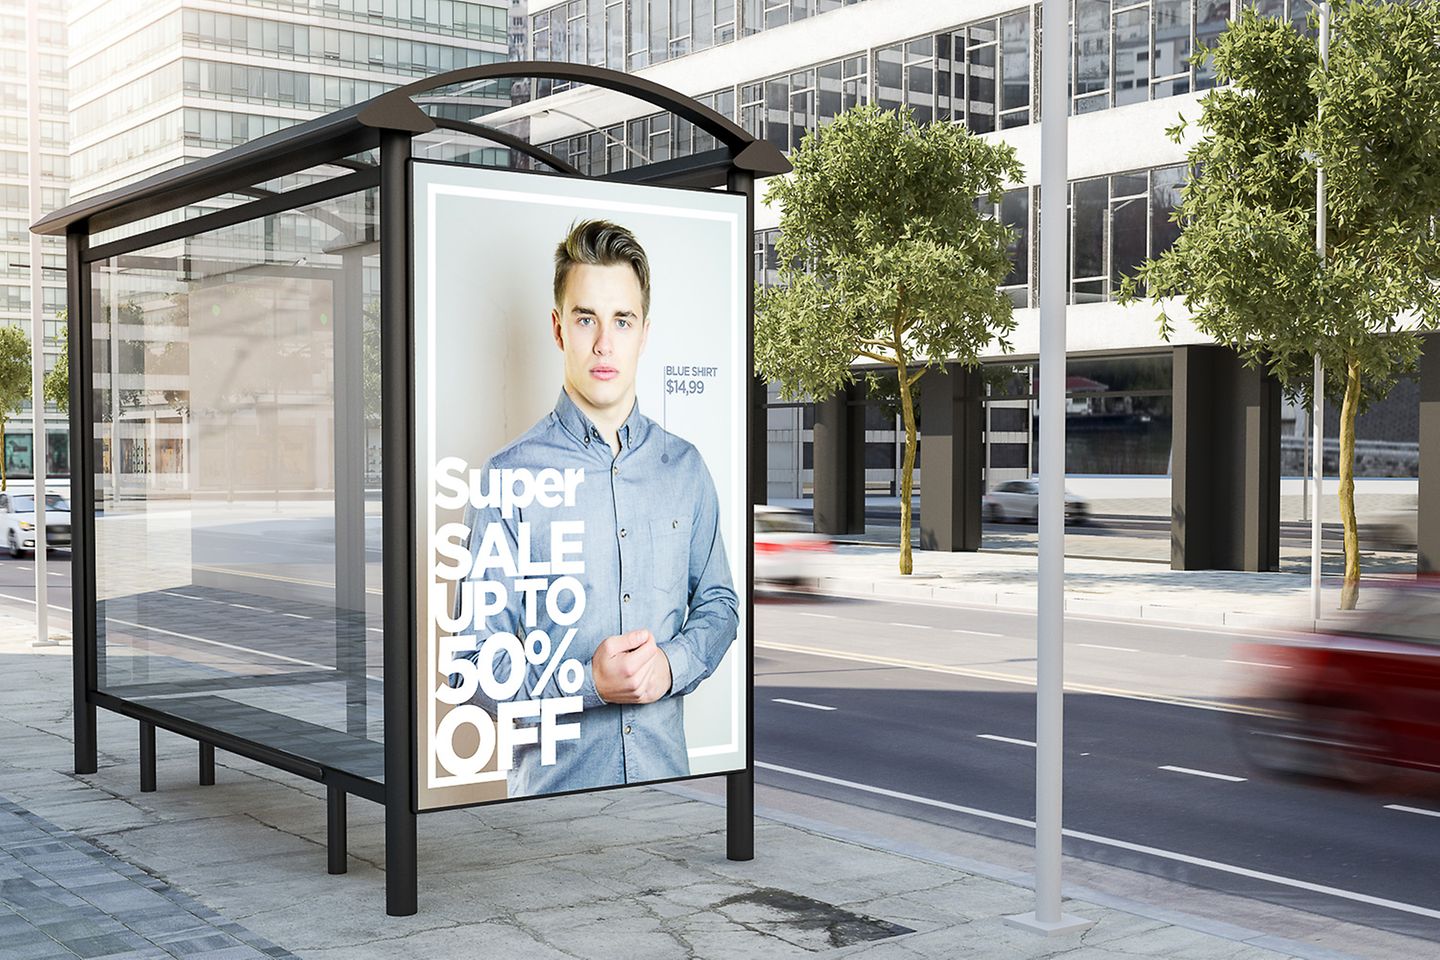 Bus stop shelter with advertisement